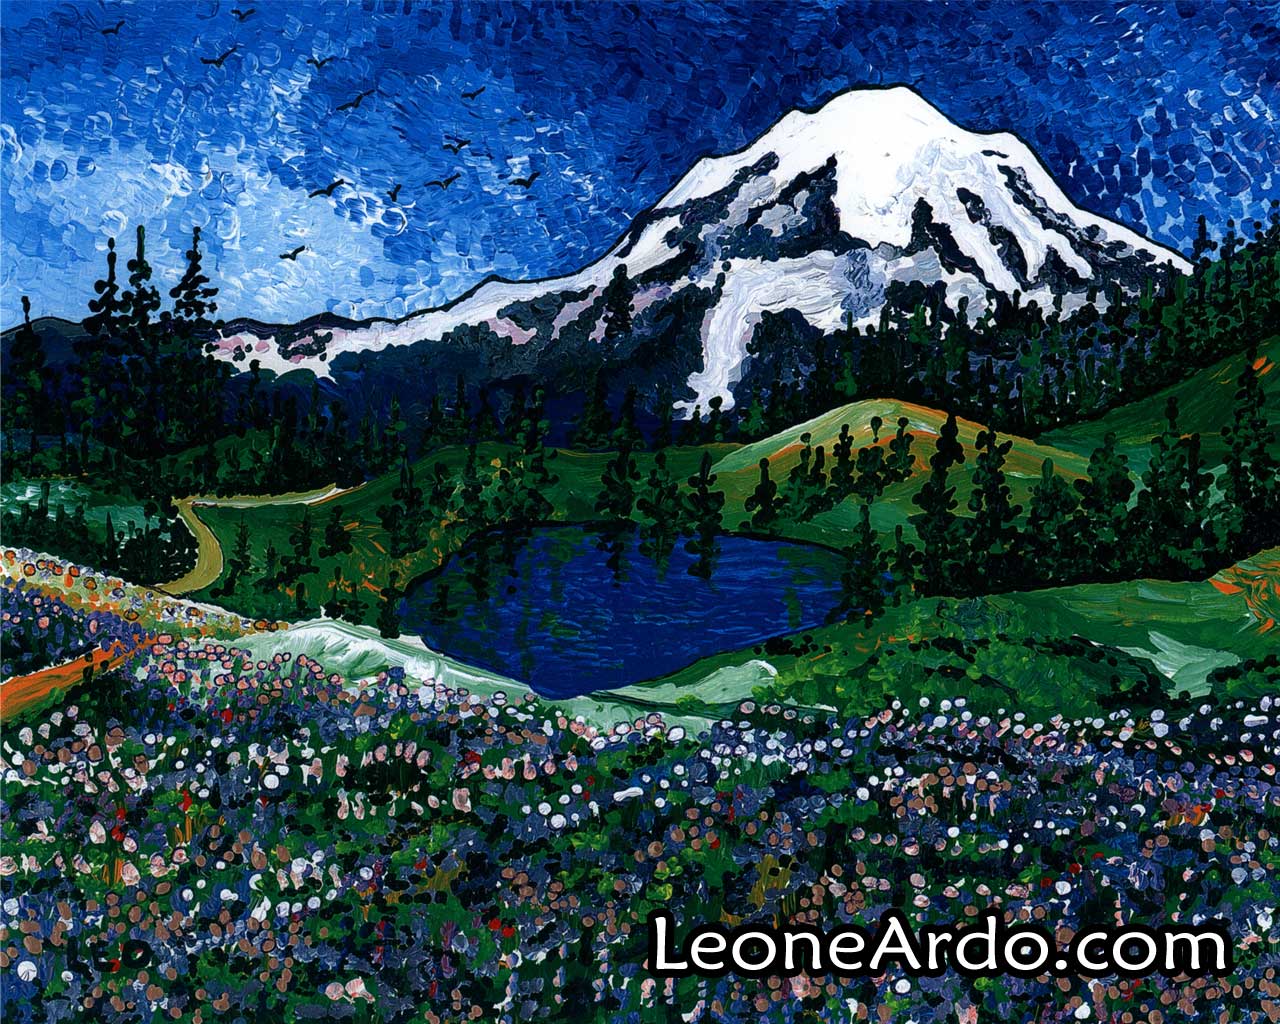 Desktop Wallpaper Featuring Original Seattle Themed Paintings And